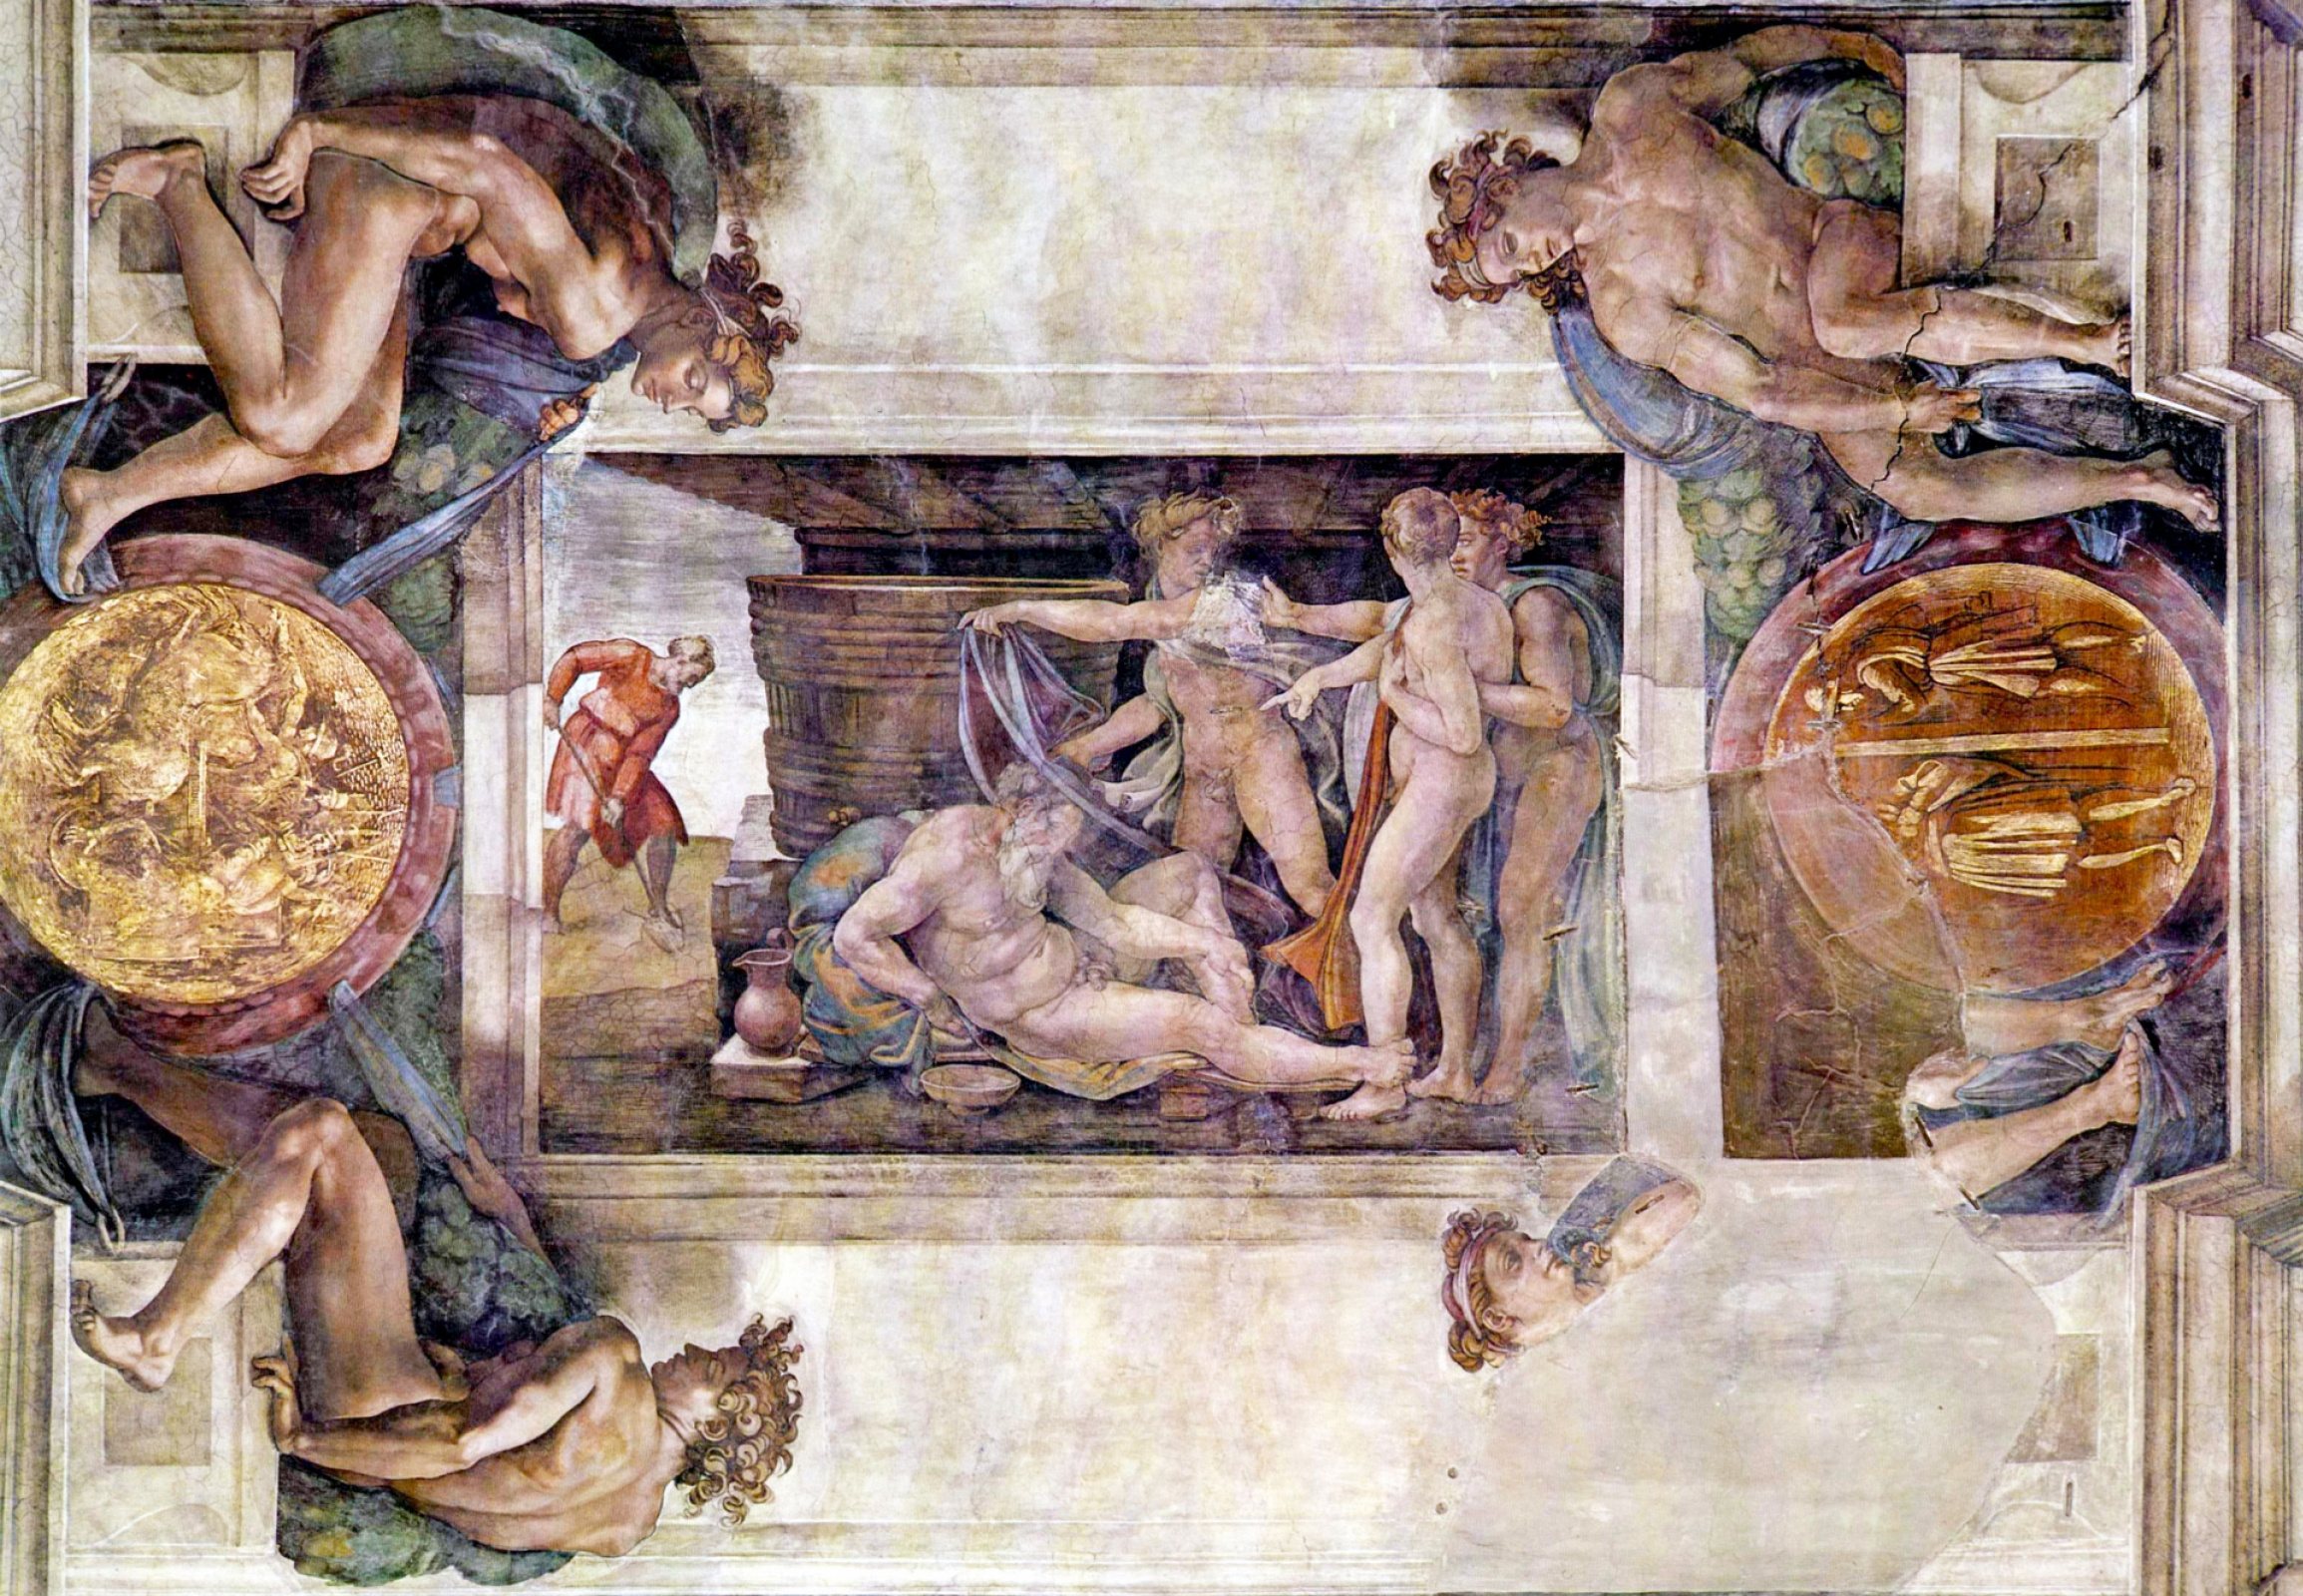 The Ceiling Of The Sistine Chapel Detail Drunkenness Of